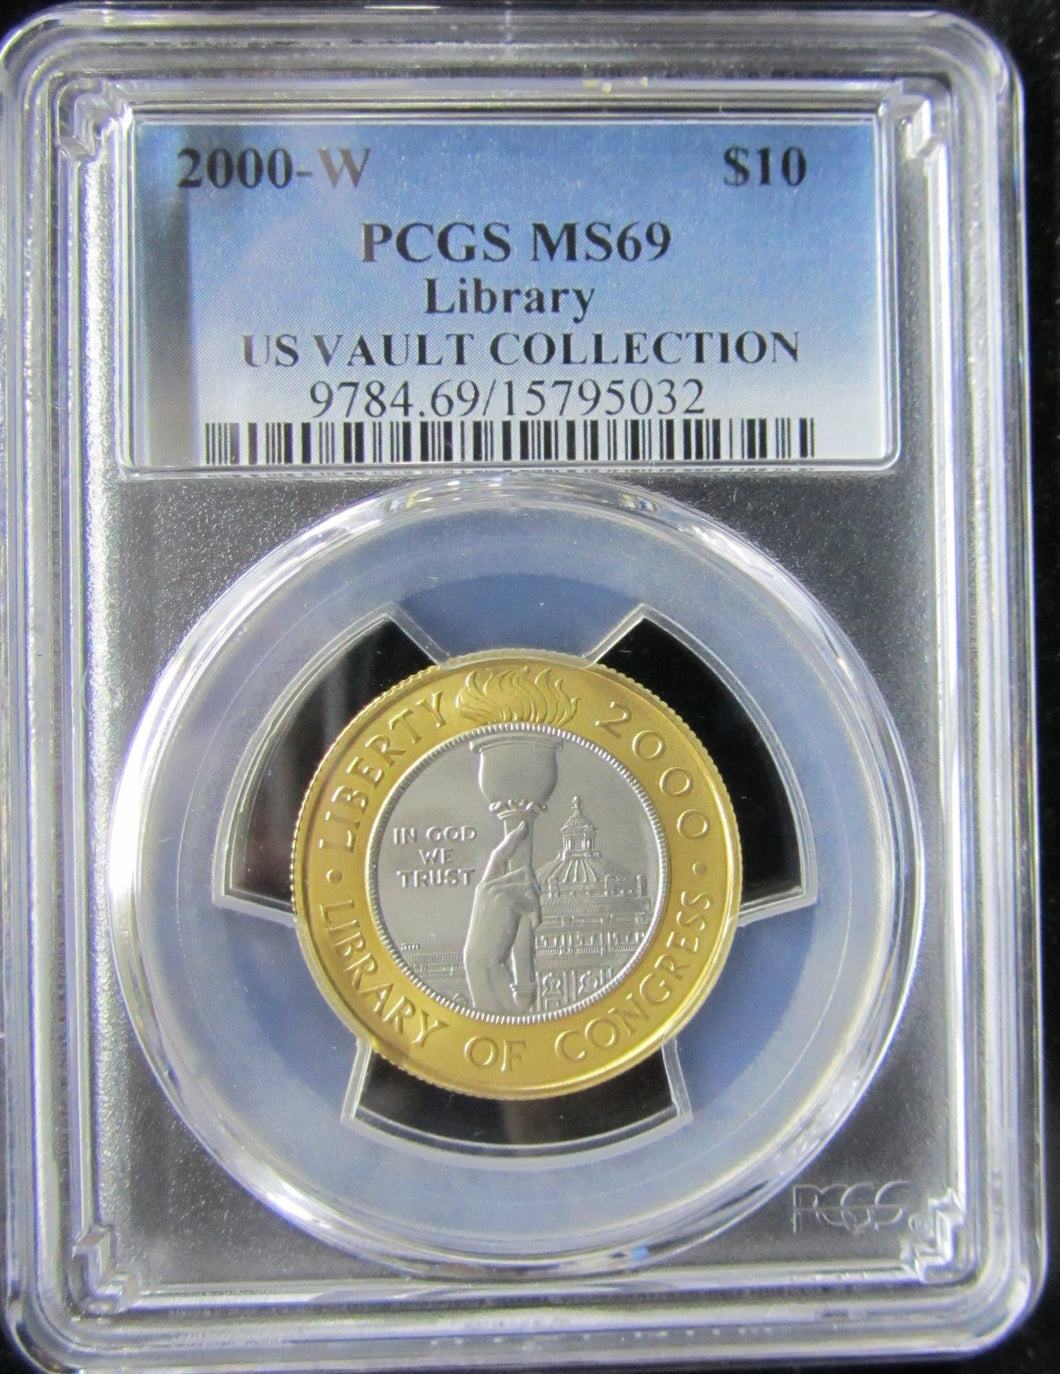 2000-W LIBRARY US VAULT COLLECTION $10 - GOLD, RHODIUM - GRADED PCGS MS69